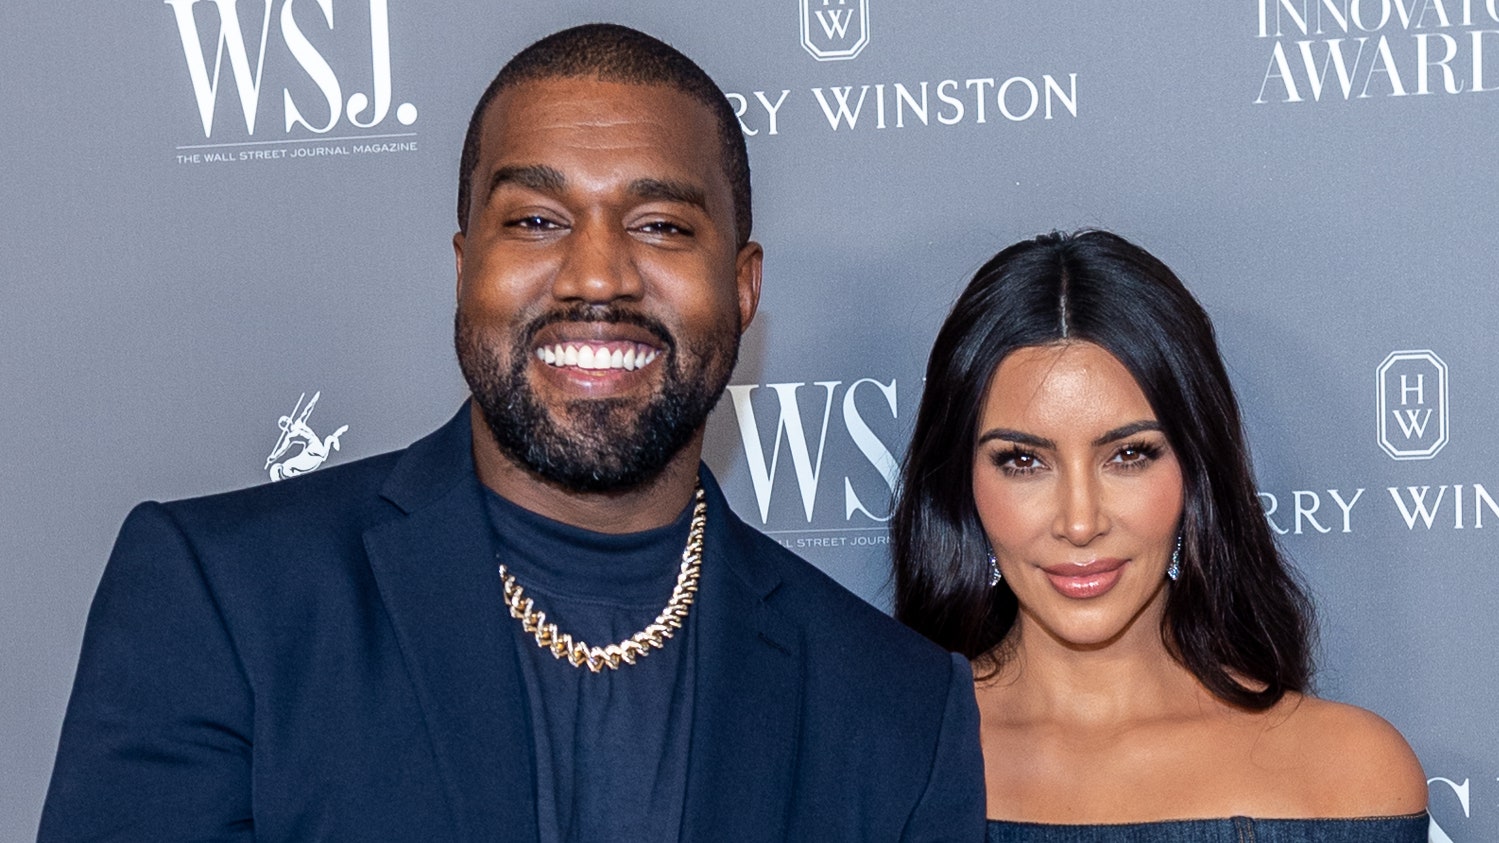 Kim Kardashian as next First Lady of US? Kanye declares candidacy for president